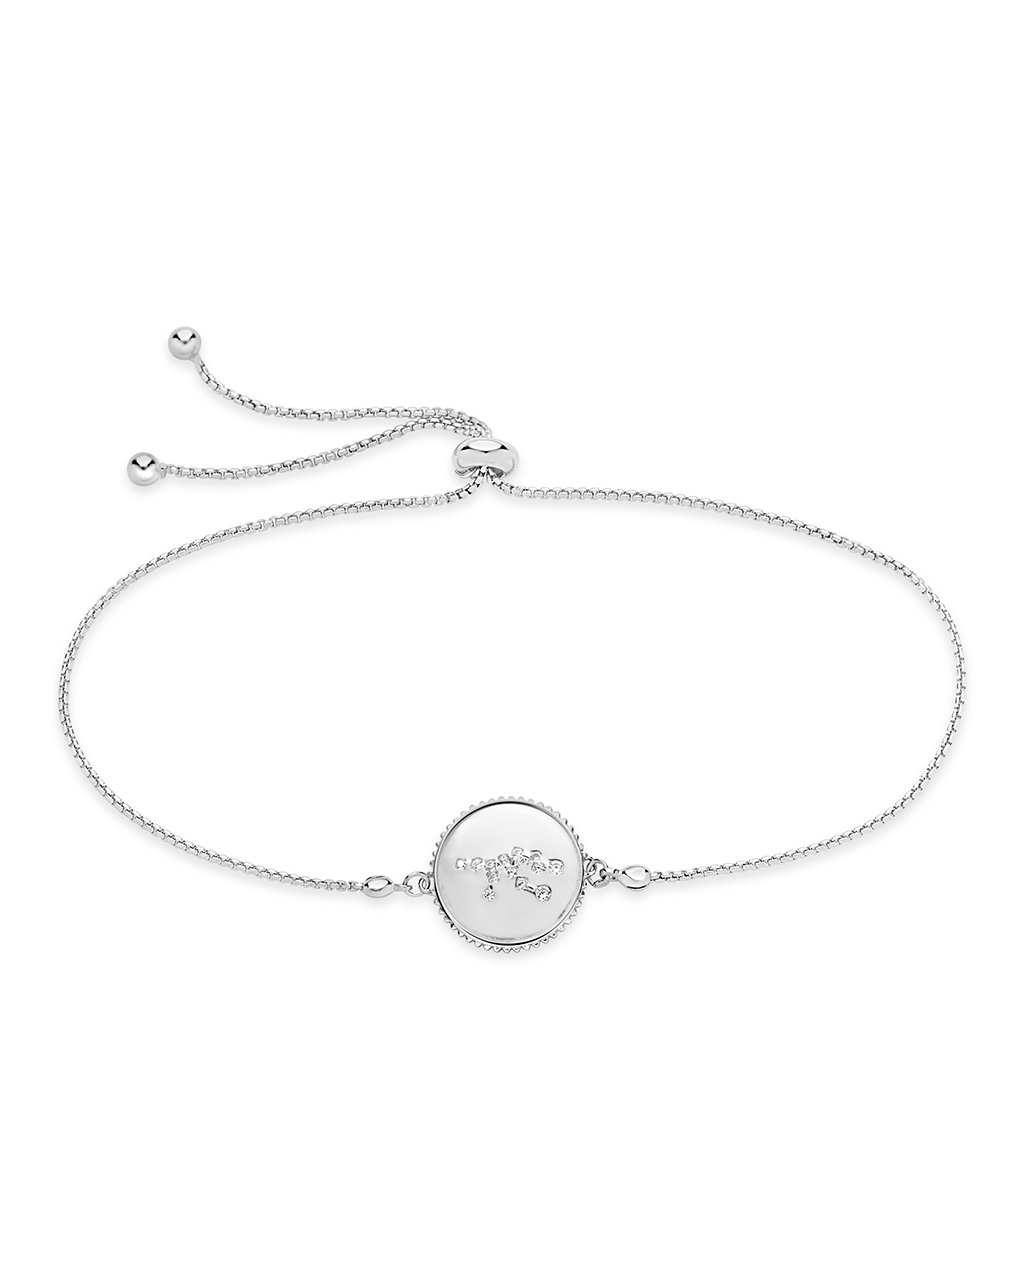 Sterling Silver Constellation Disk Bolo Bracelet Bracelet Sterling Forever Silver Virgo (Aug 23 - Sept 22) 